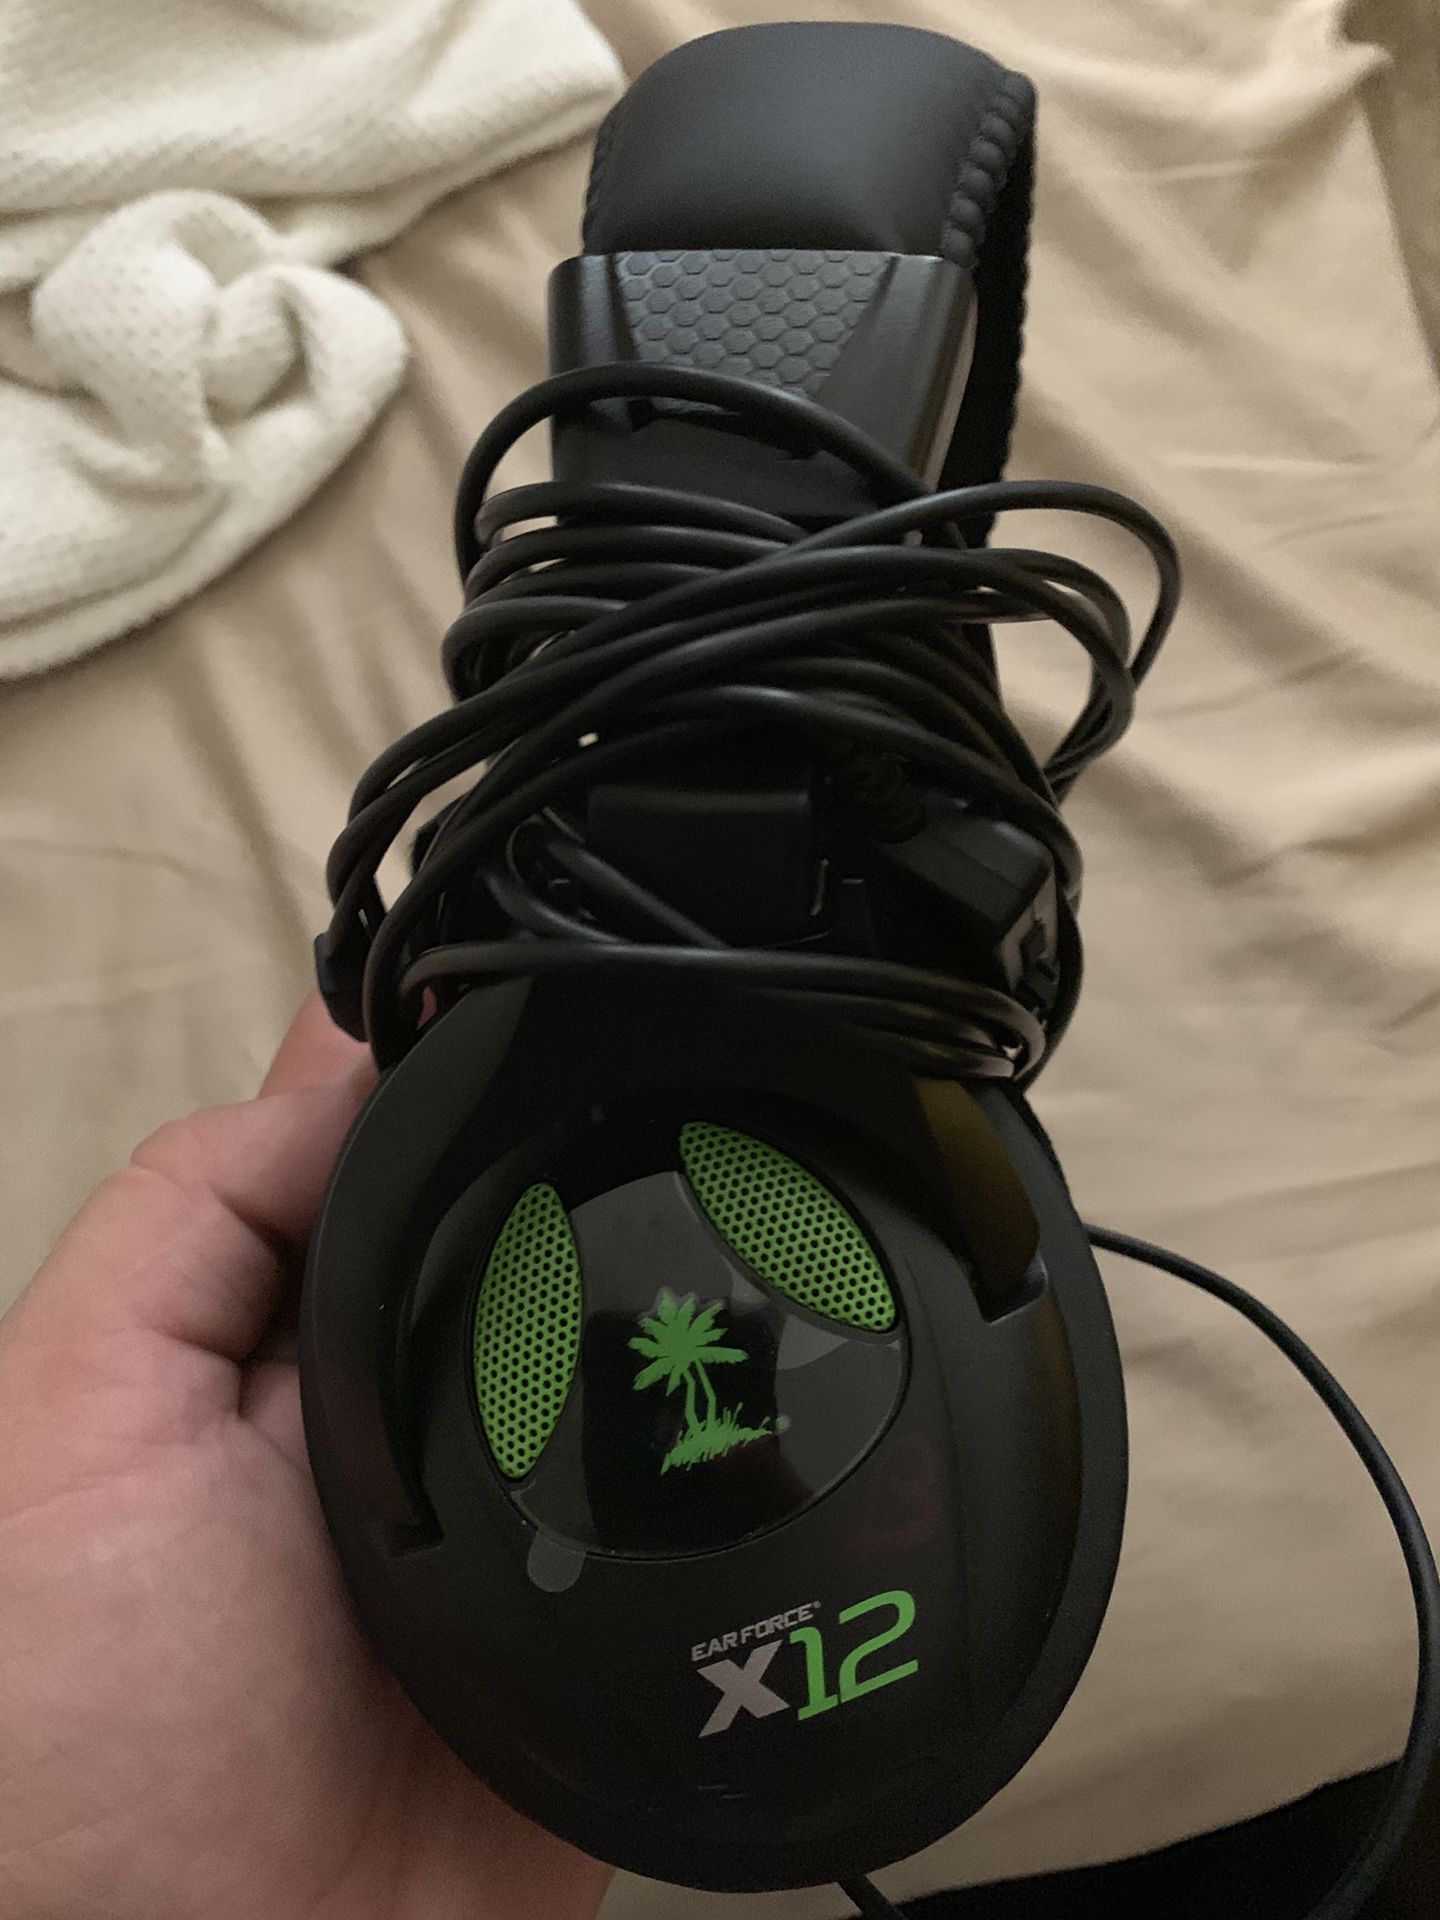 Turtle beach Air Force X 12 headset for sale